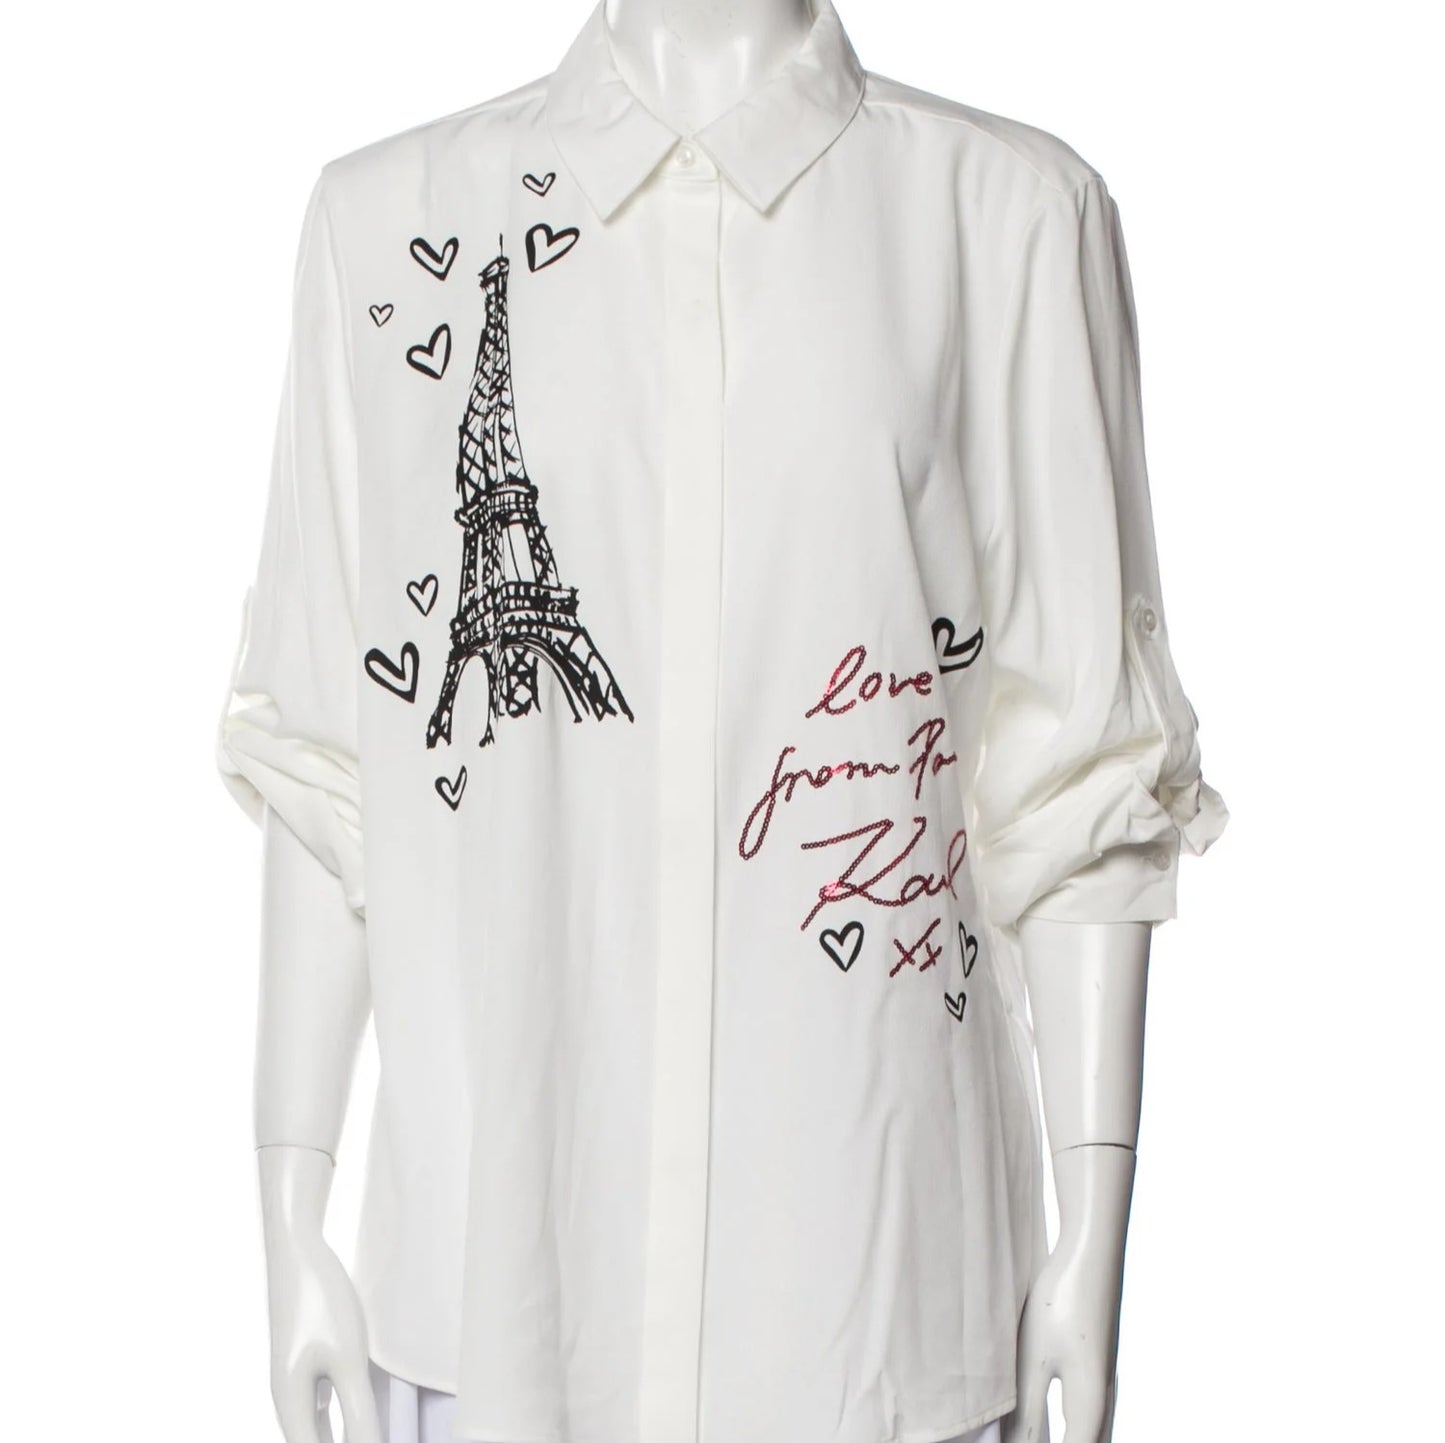 Karl Lagerfeld Embellished Button-Up Shirt- Size M